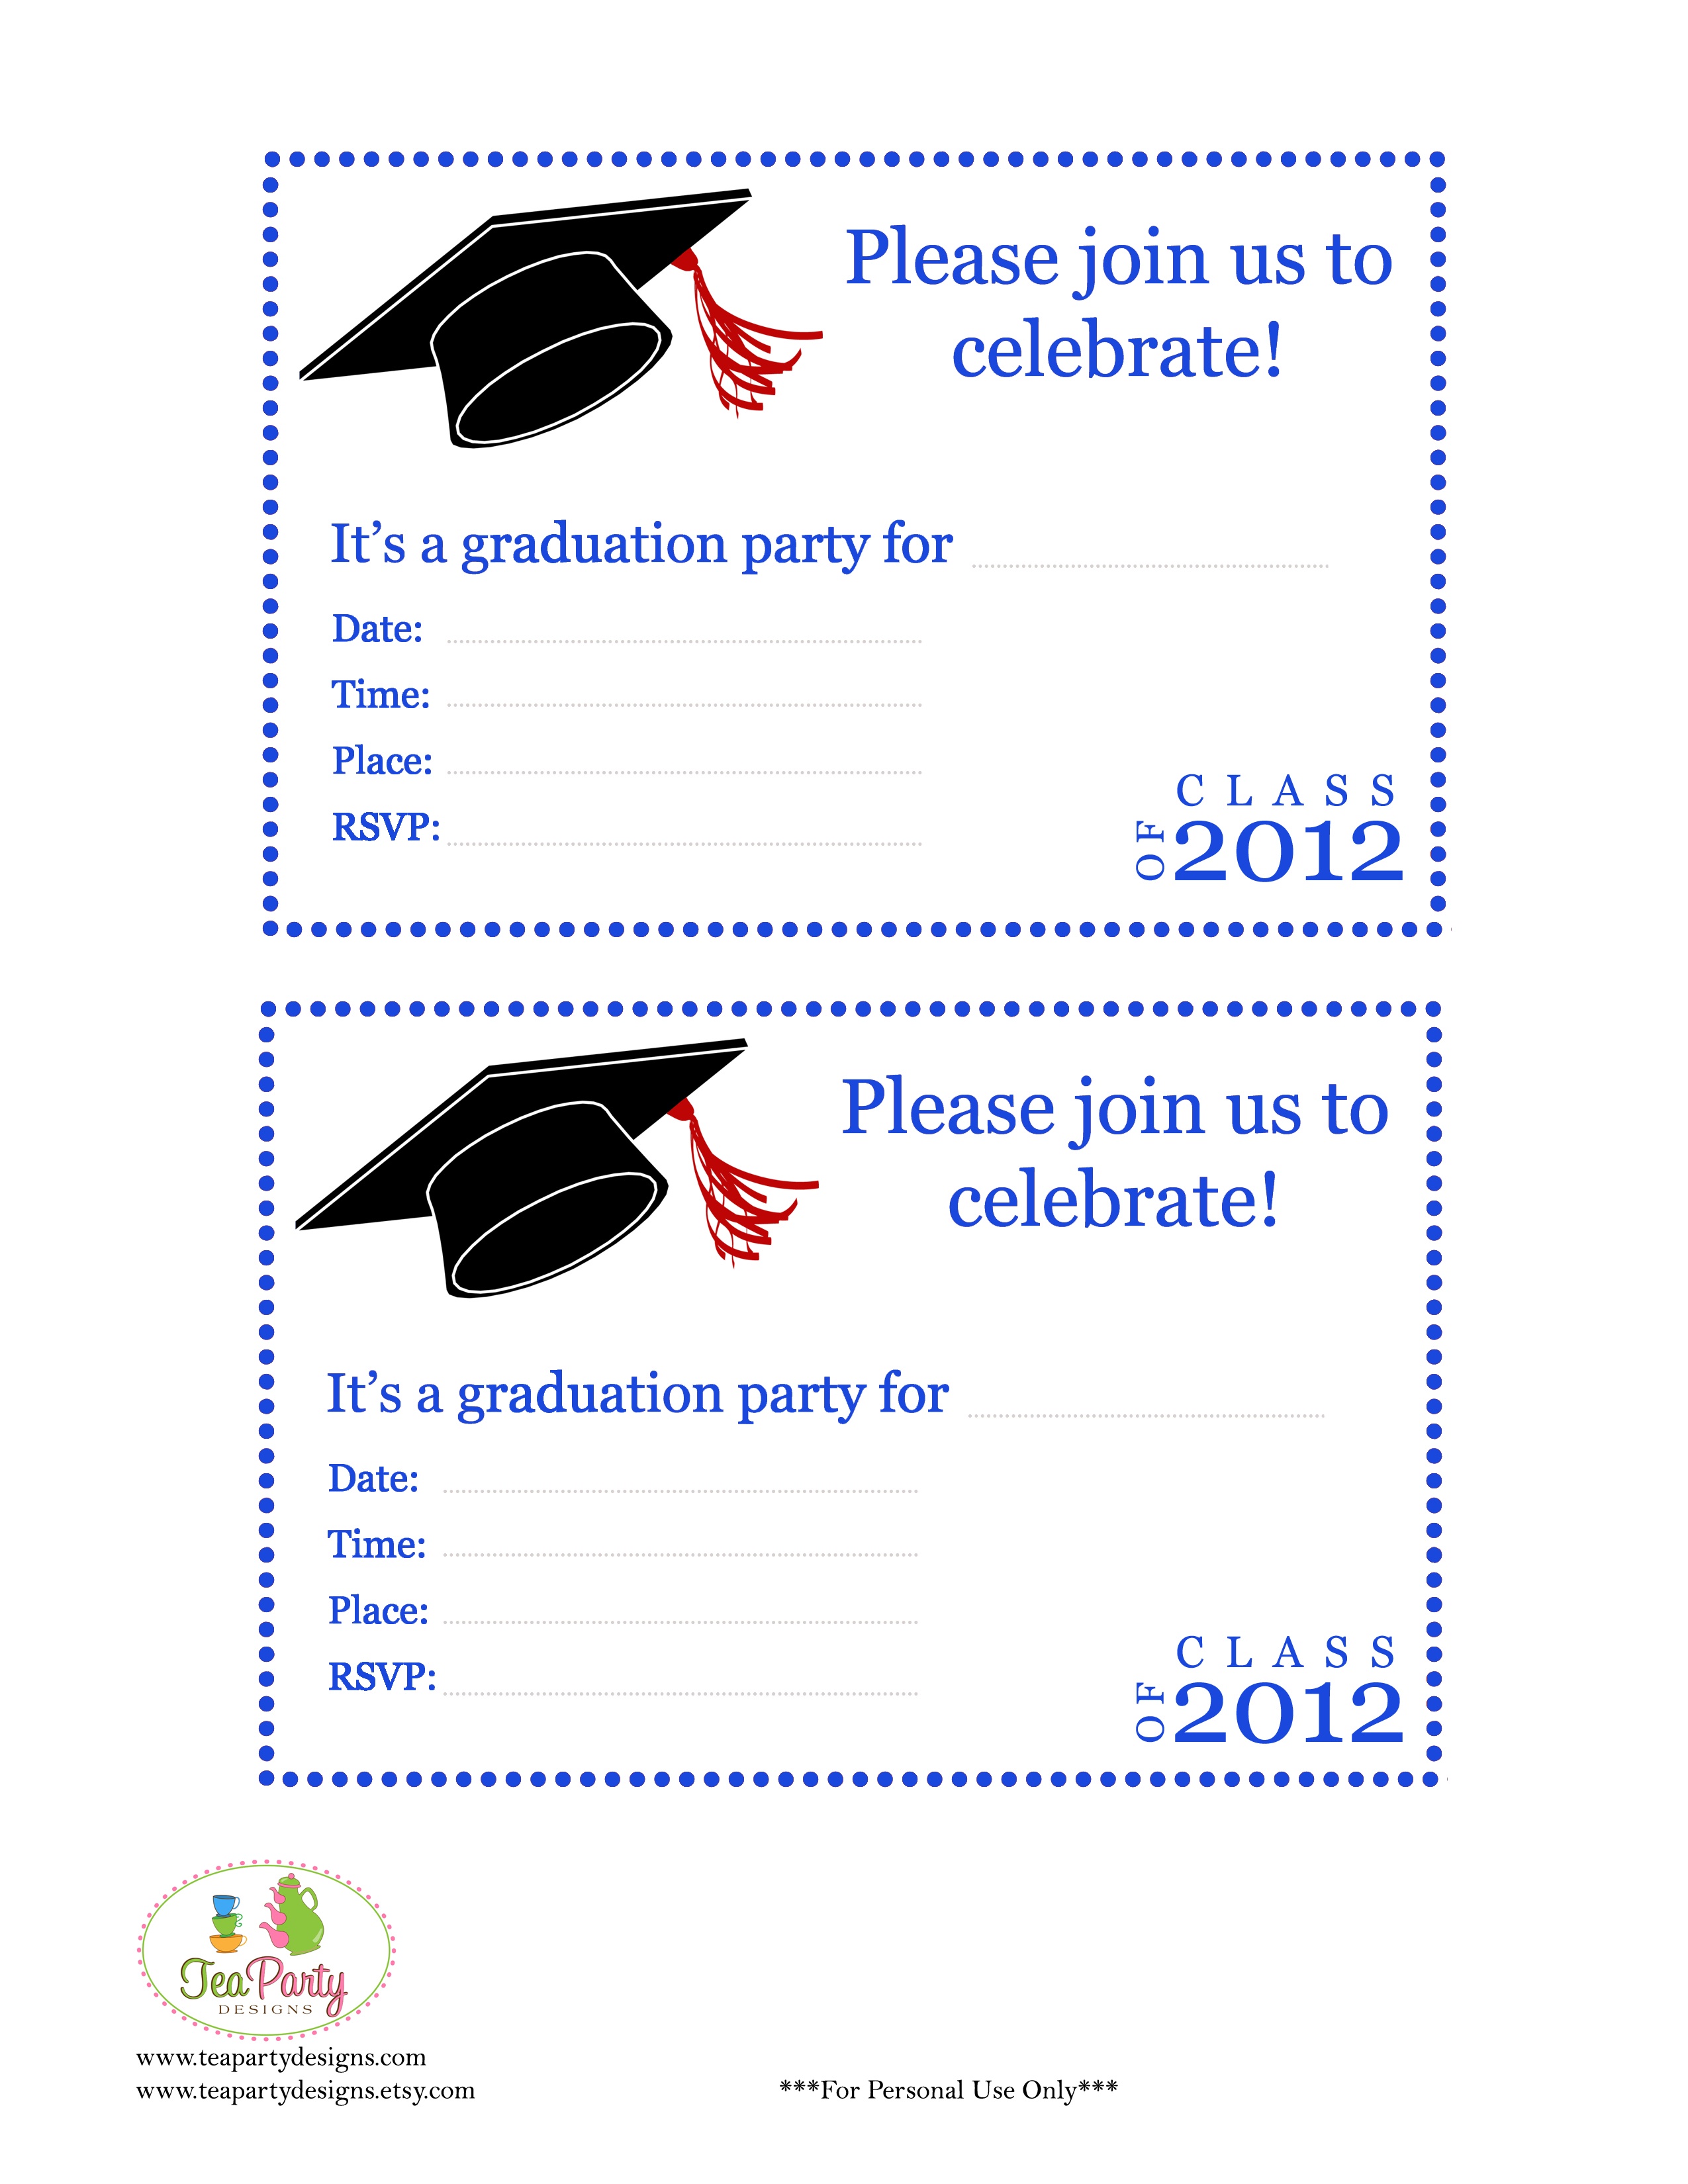 Free Printable Graduation Card (80+ Images In Collection) Page 1 - Free Printable Graduation Cards